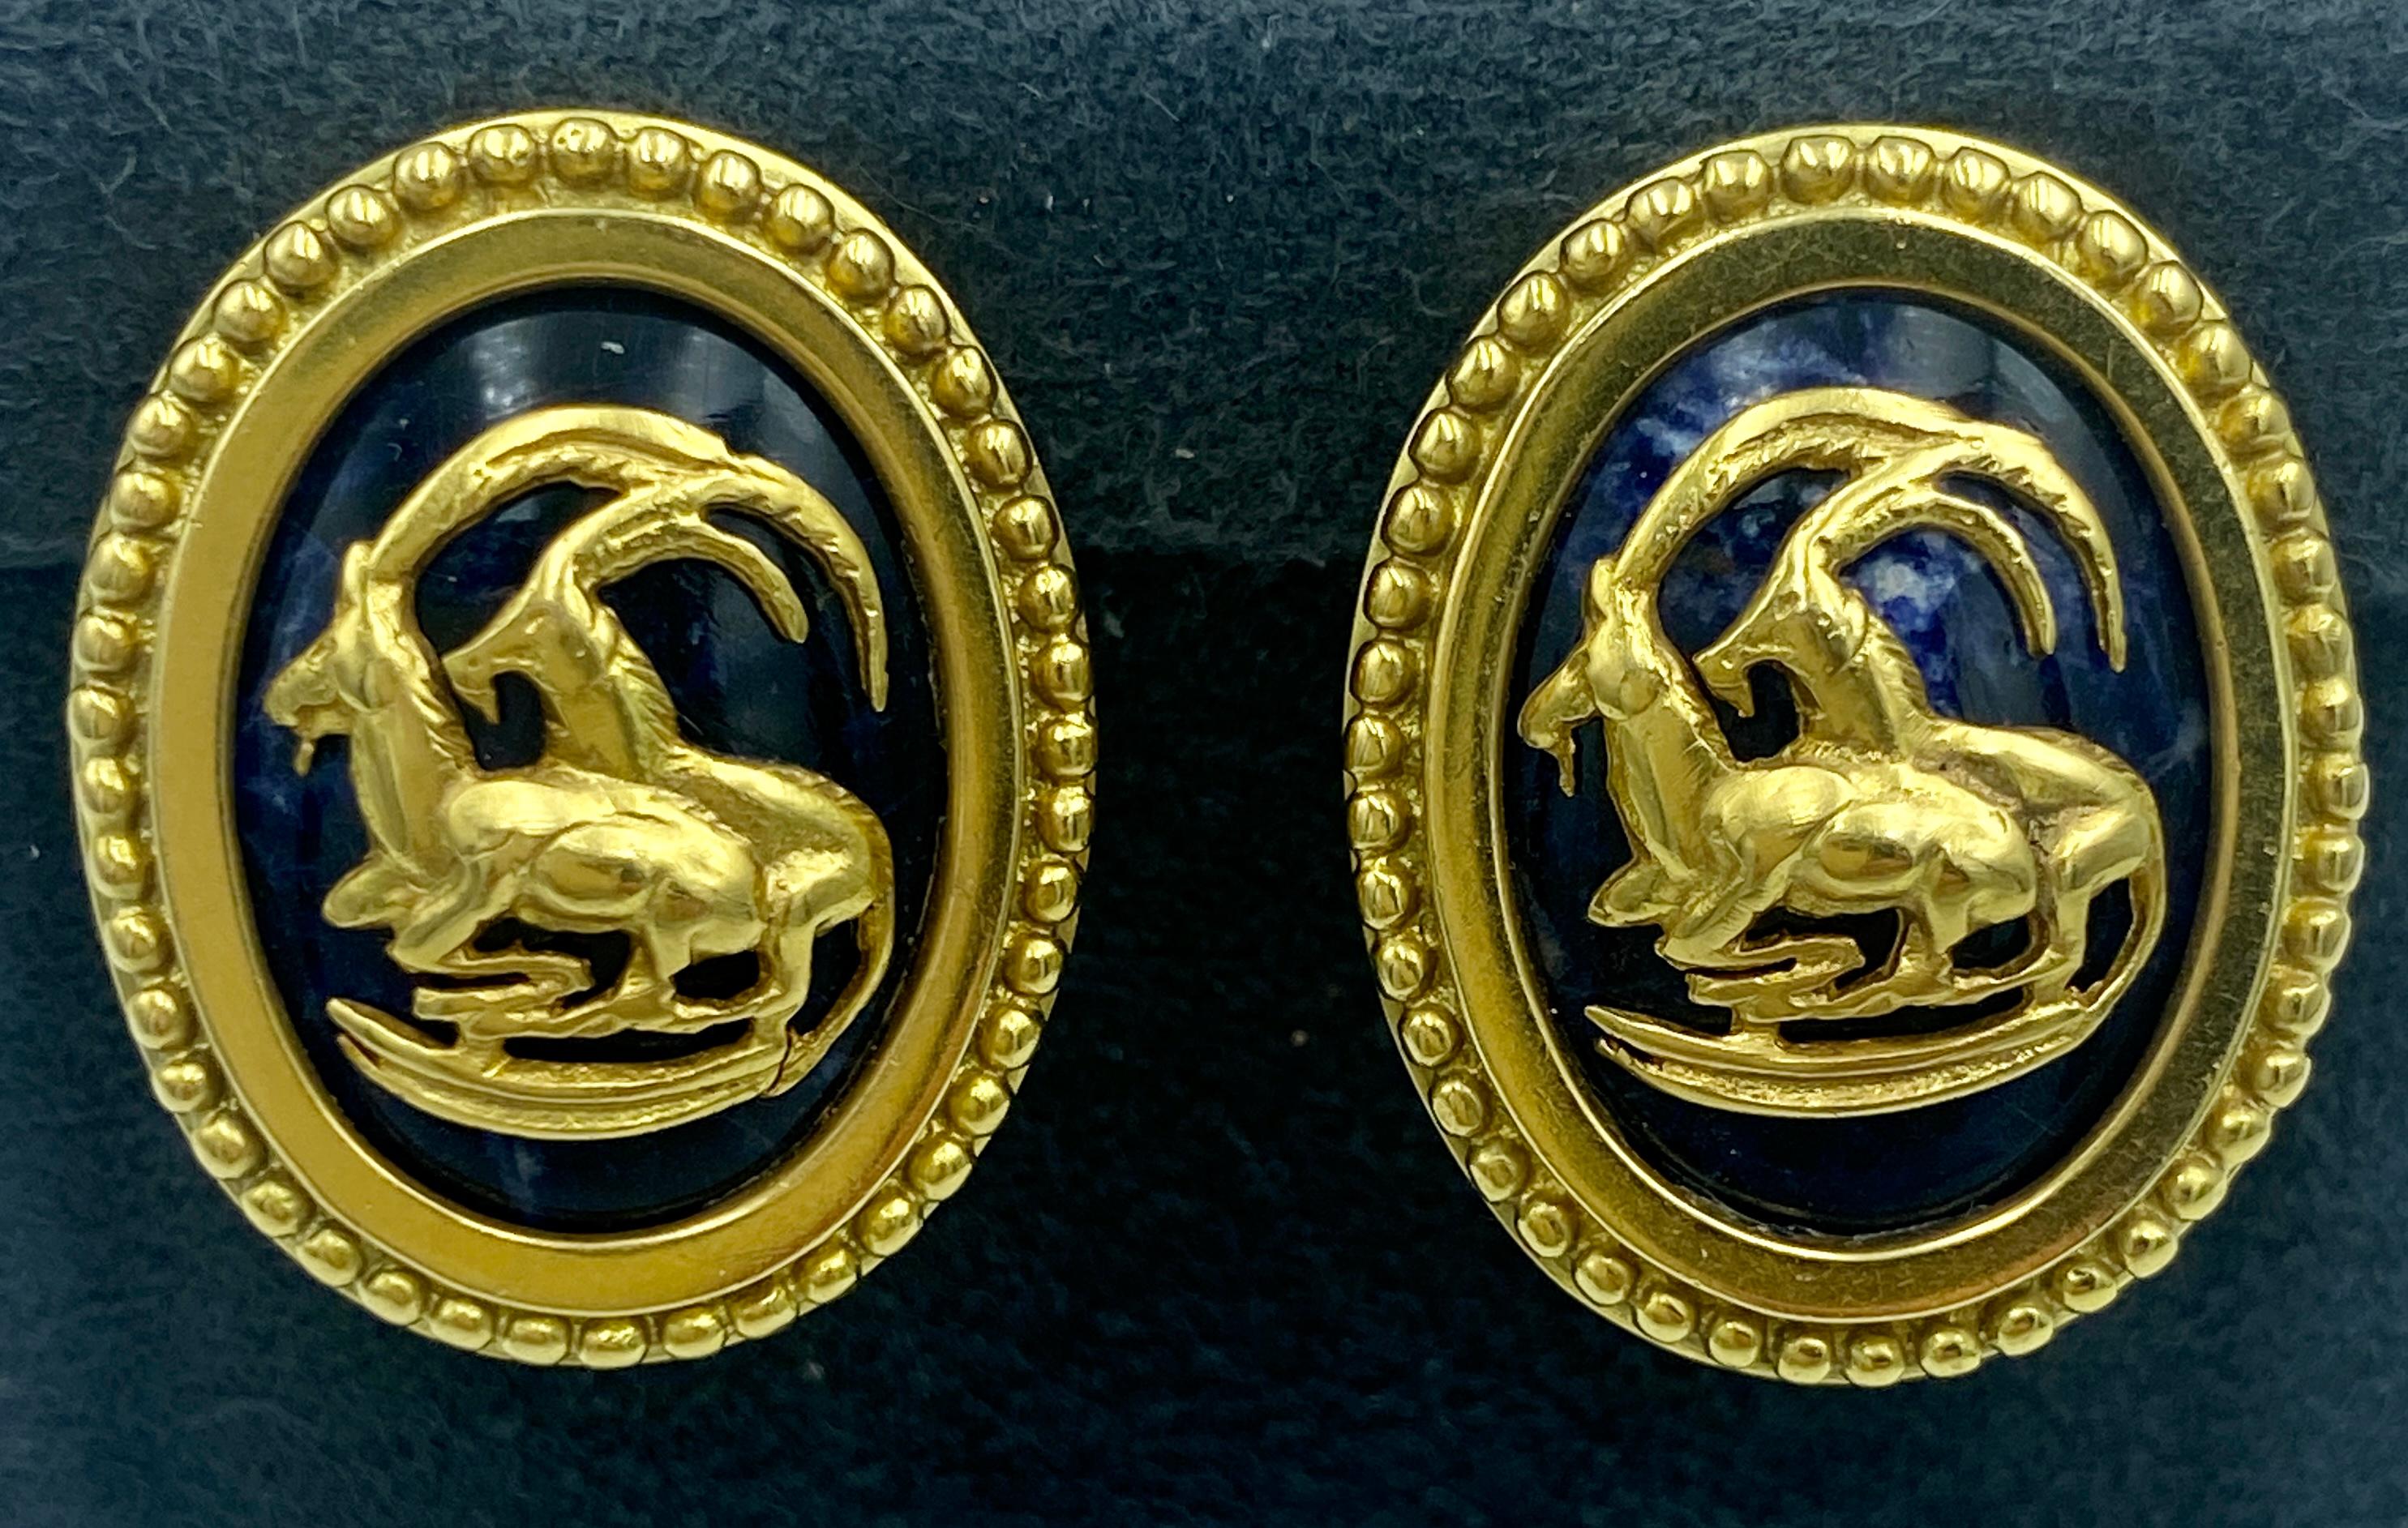 Ilias Lalounis 18k gold and lapis lazuli bracelet with mountain goat design In Good Condition For Sale In London, GB